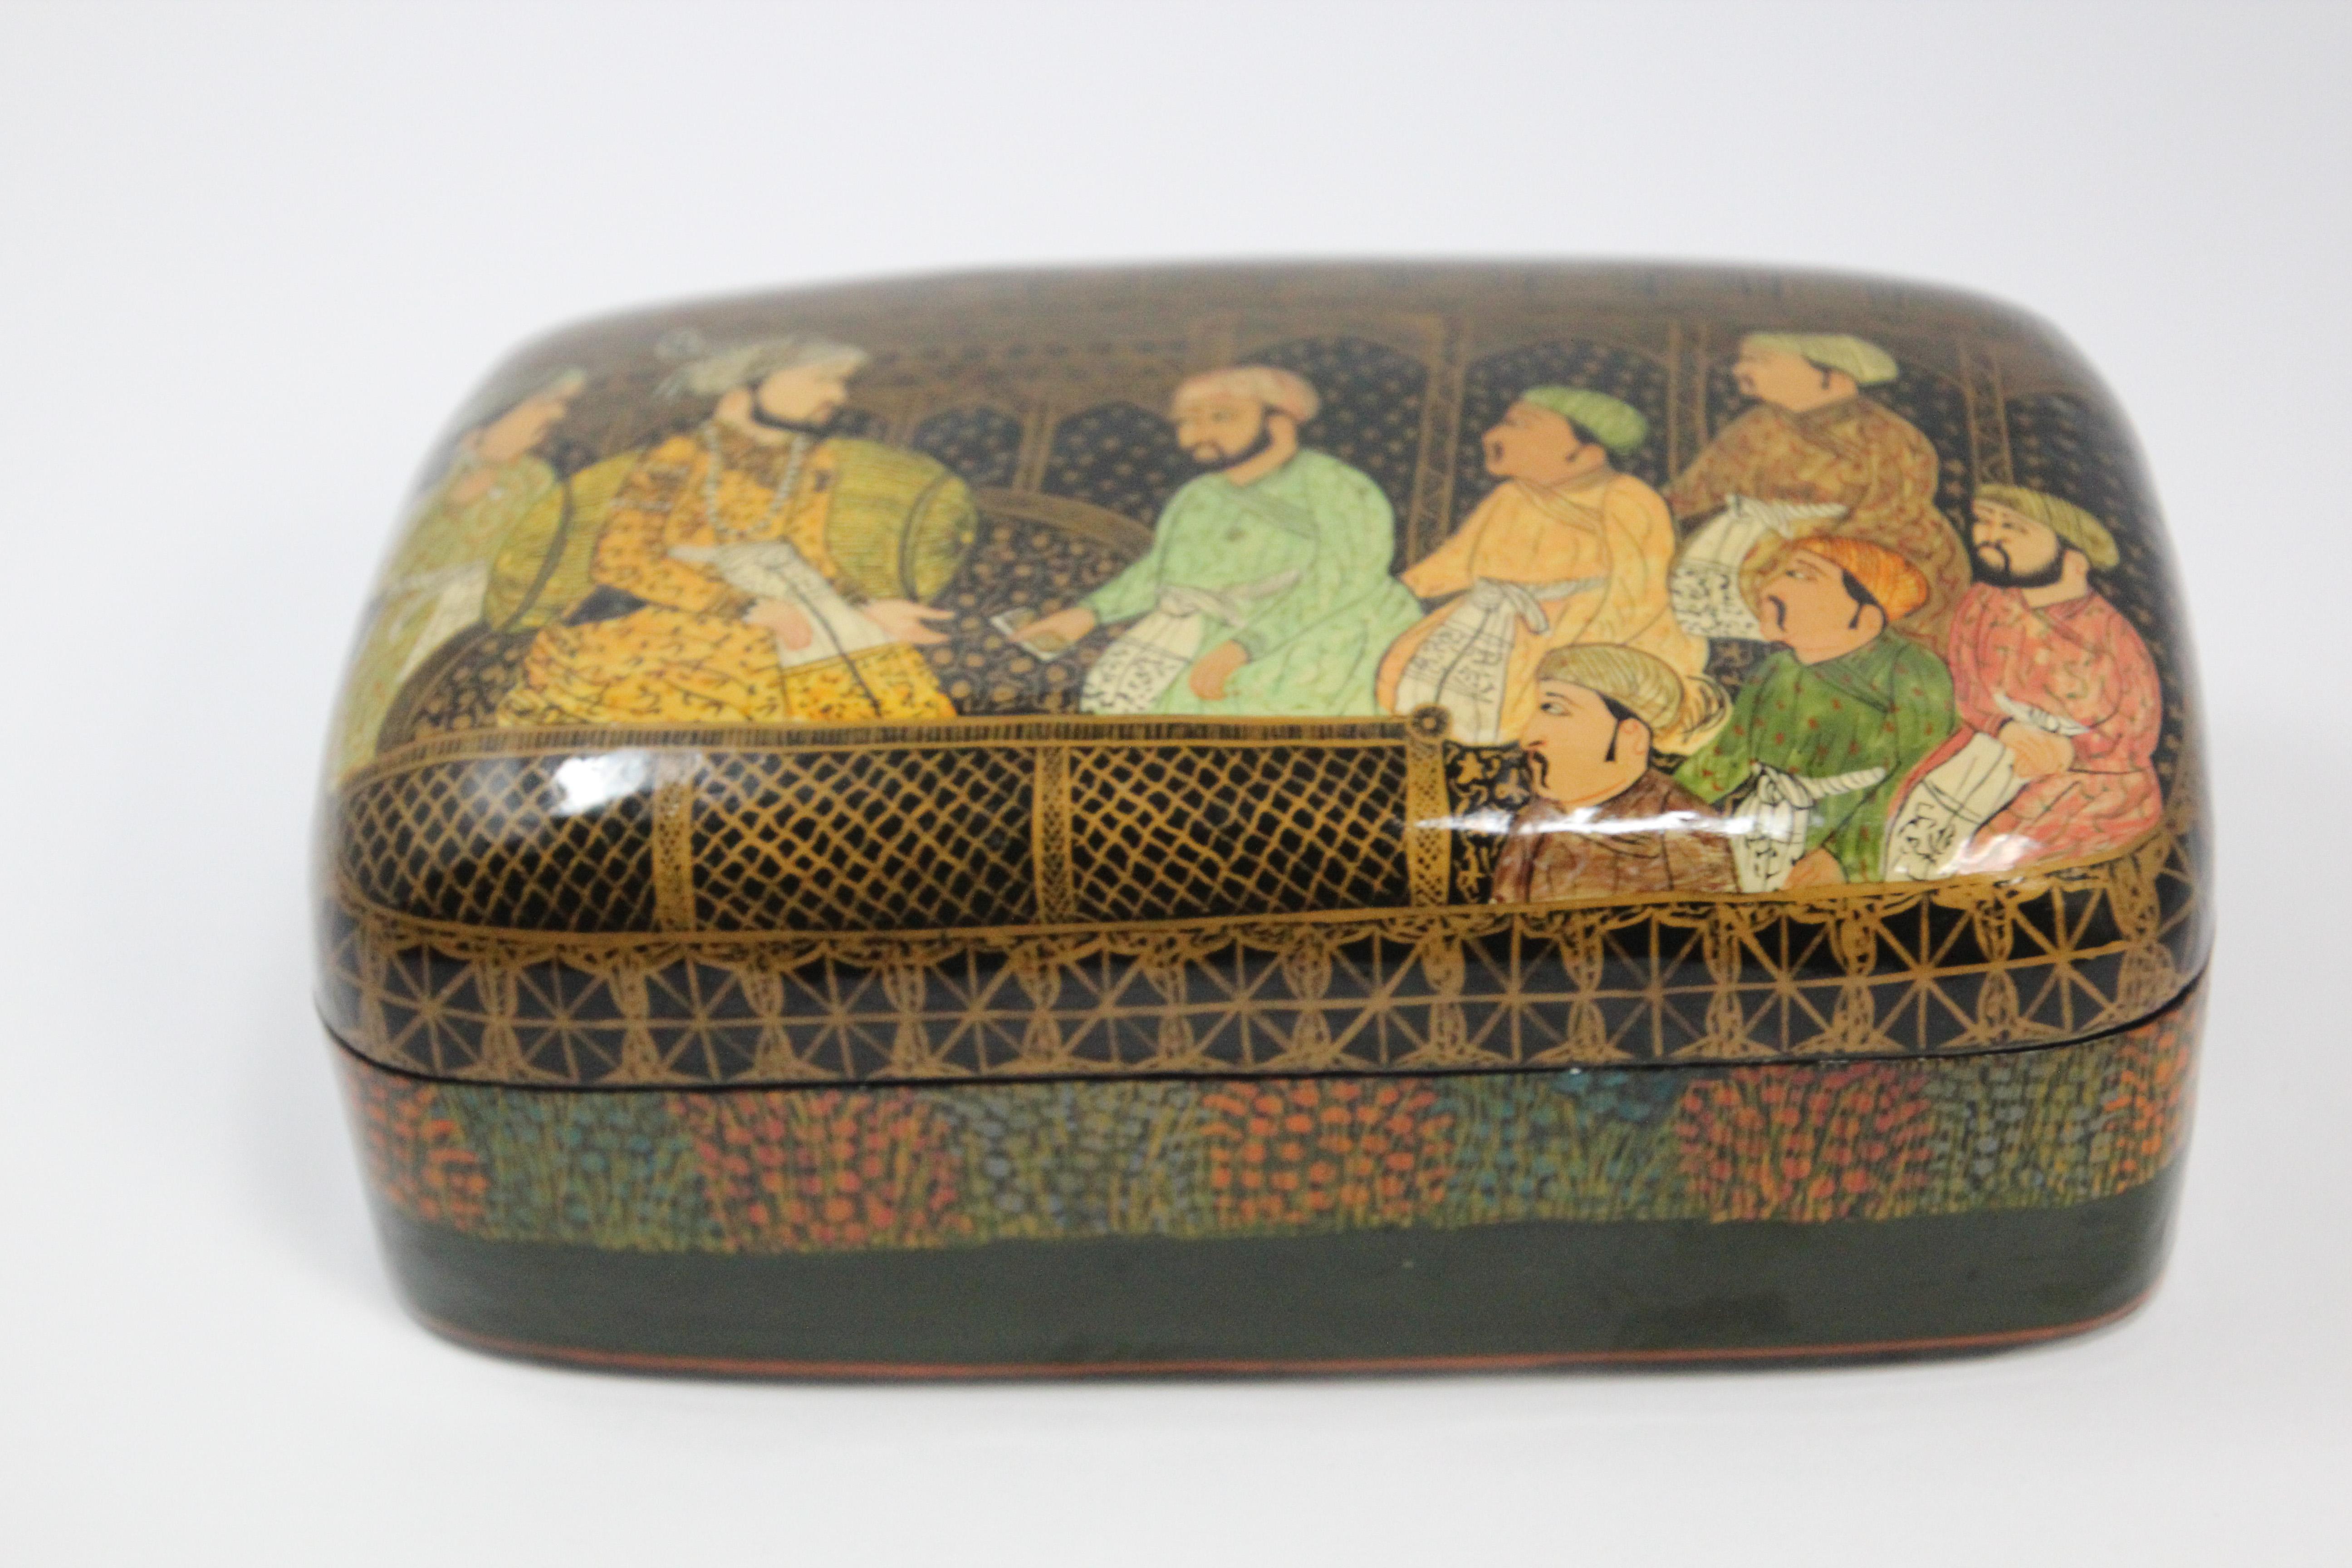 Paper Lacquer Box Hand Painted with Mughals Maharajahs, Kashmir, India